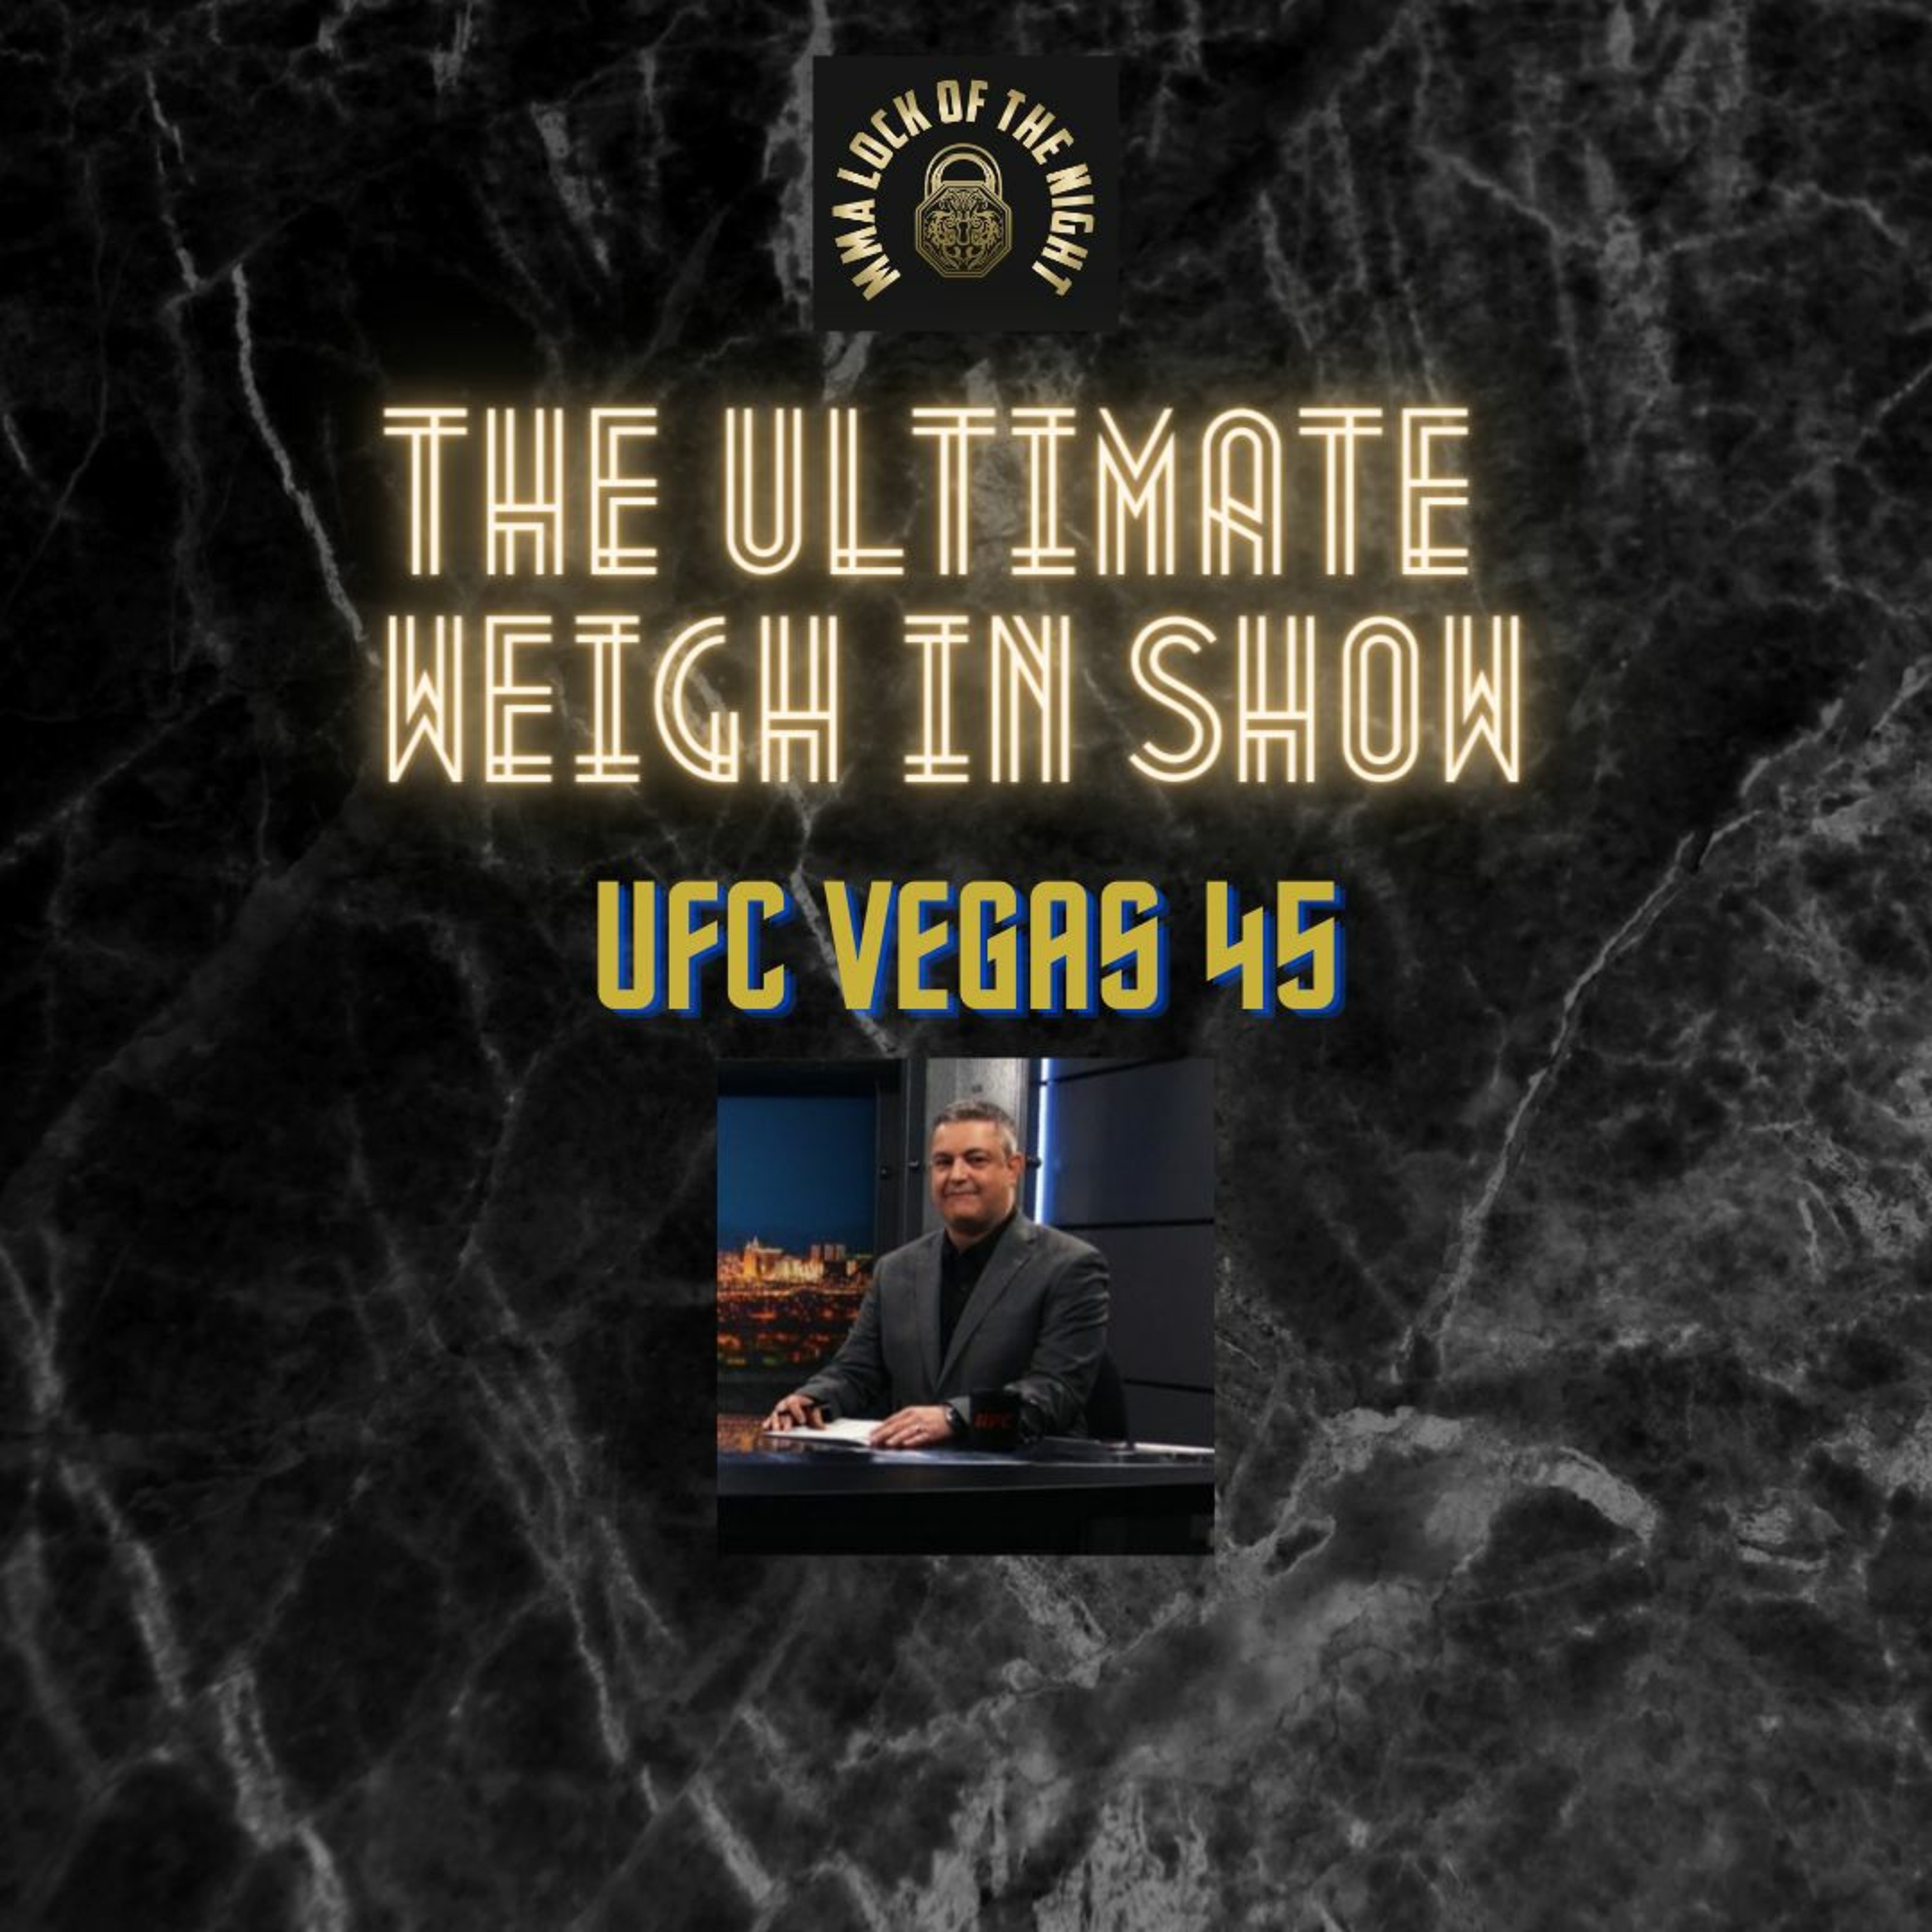 UFC Vegas 45 Predictions & Betting Tips | The Ultimate Weigh In Show w/ Nick Kalikas